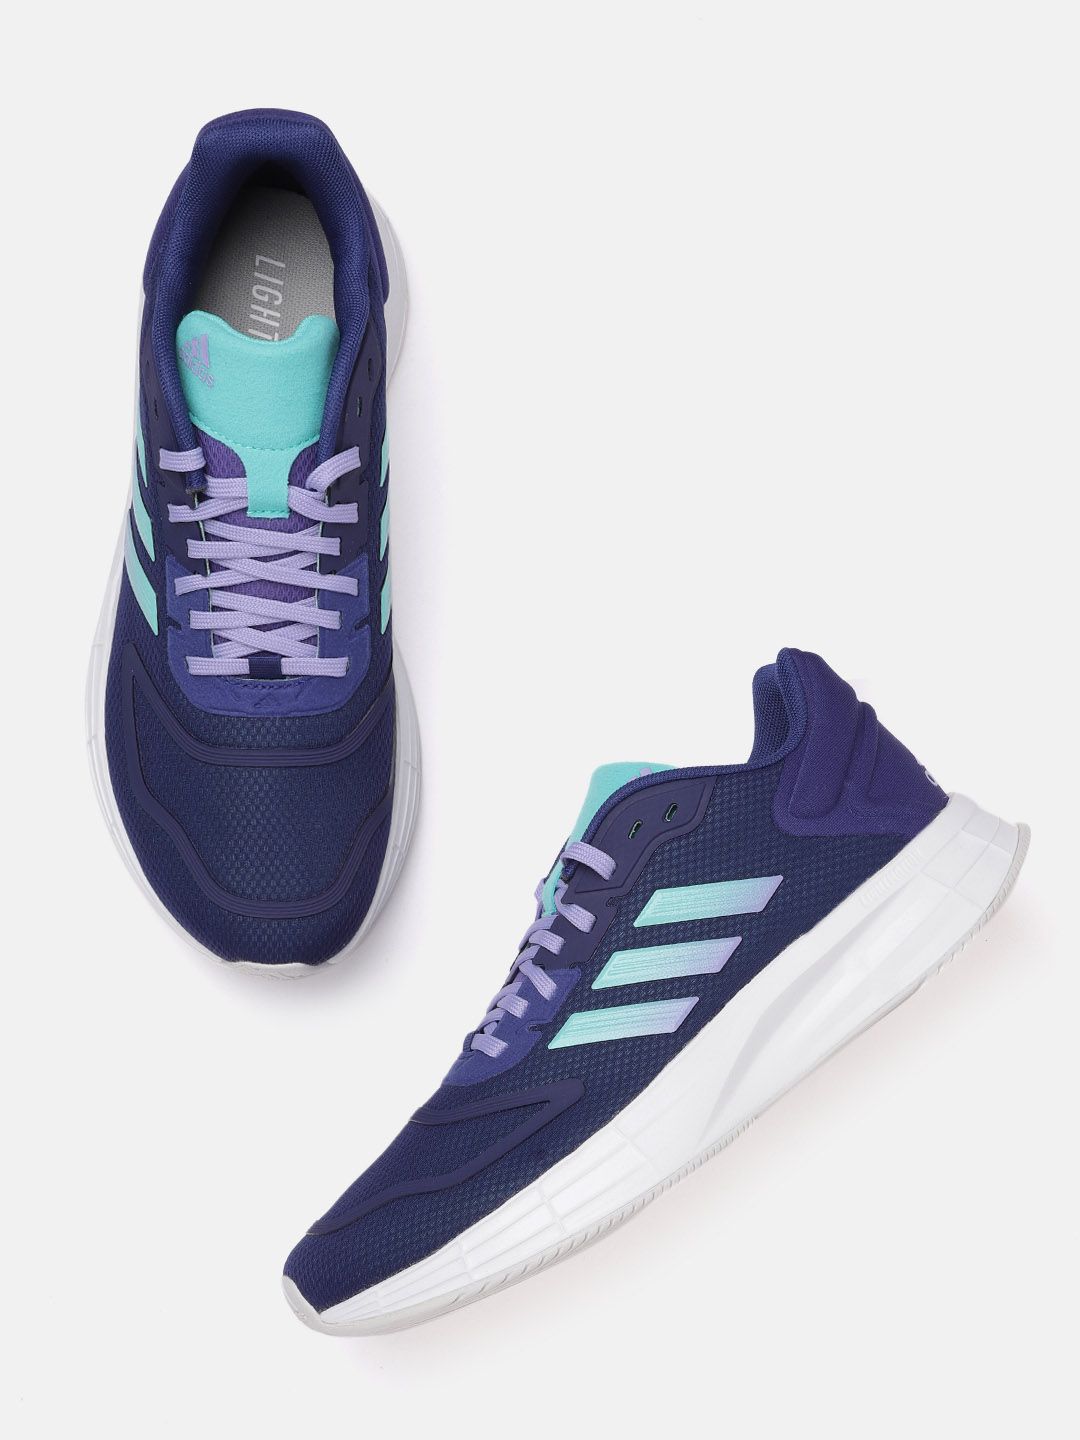 ADIDAS Women Navy Blue Woven Design Duramo SL 2.0 Sustainable Running Shoes Price in India